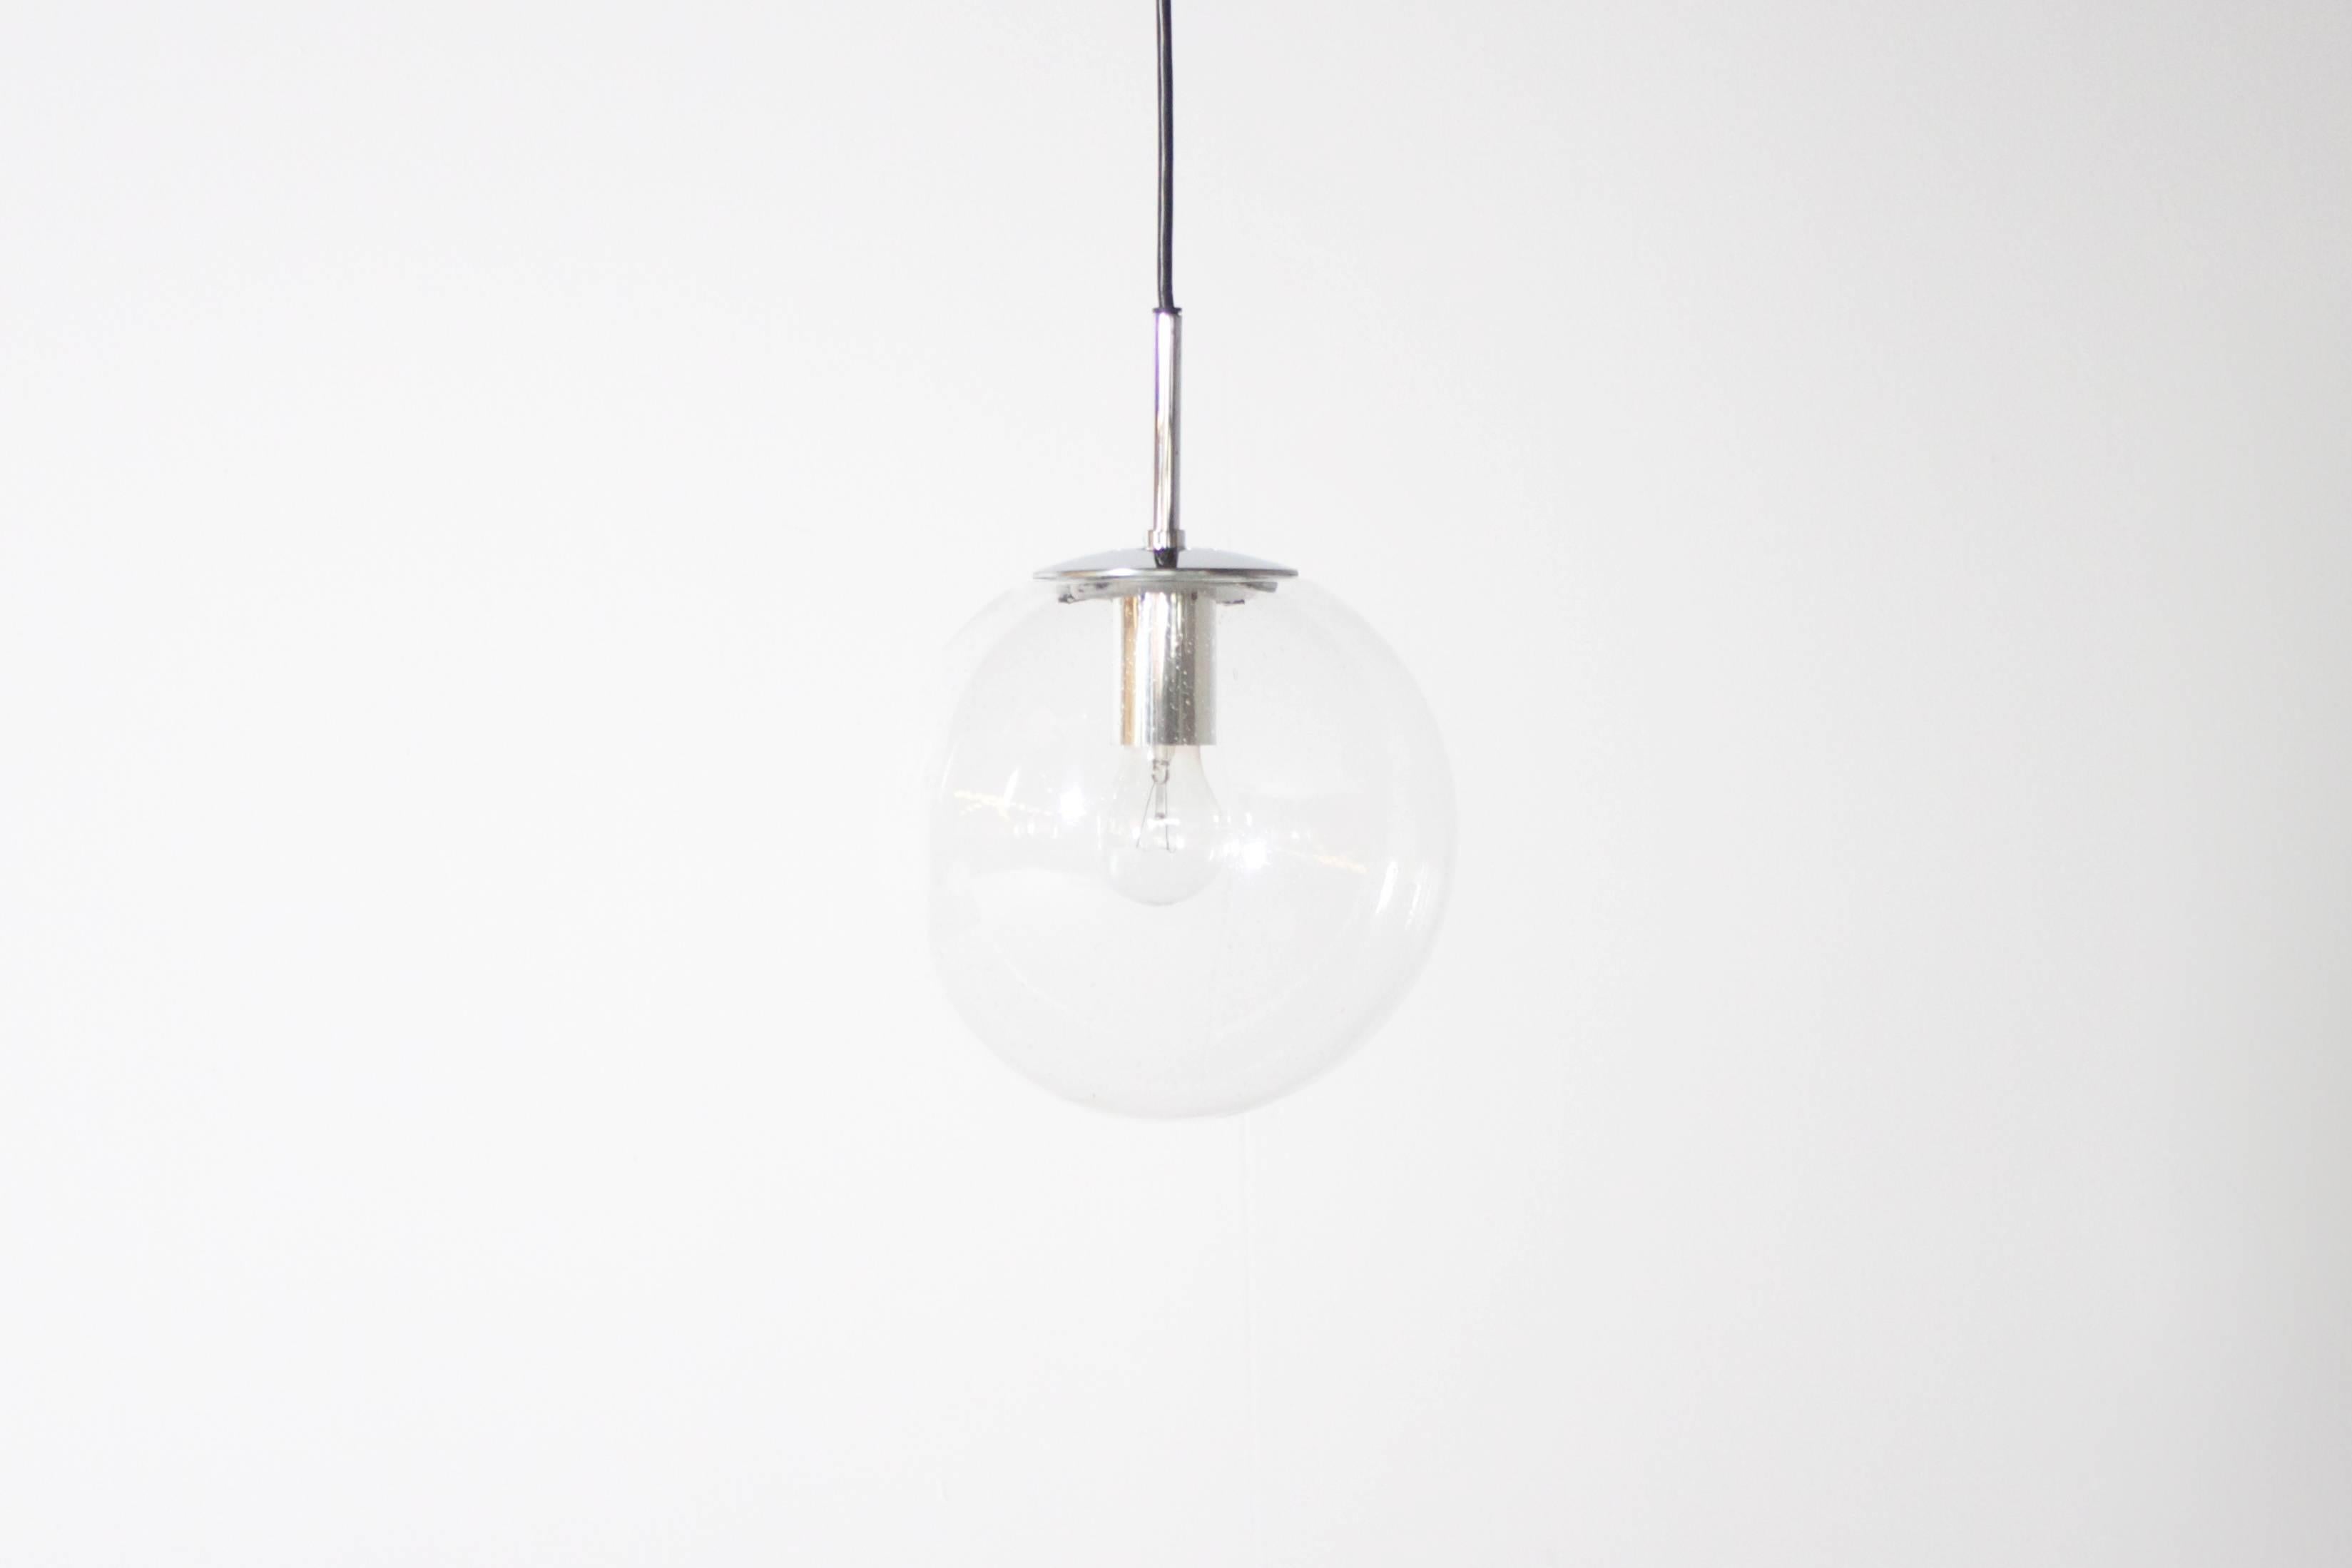 Glashütte Limburg pendants in beautiful condition. 

Chromed hardware. 

Handblown transparent bubbled glass globes which create a wonderful light effect.

Black cord and original canopy. 

The length of the cord can be customized for